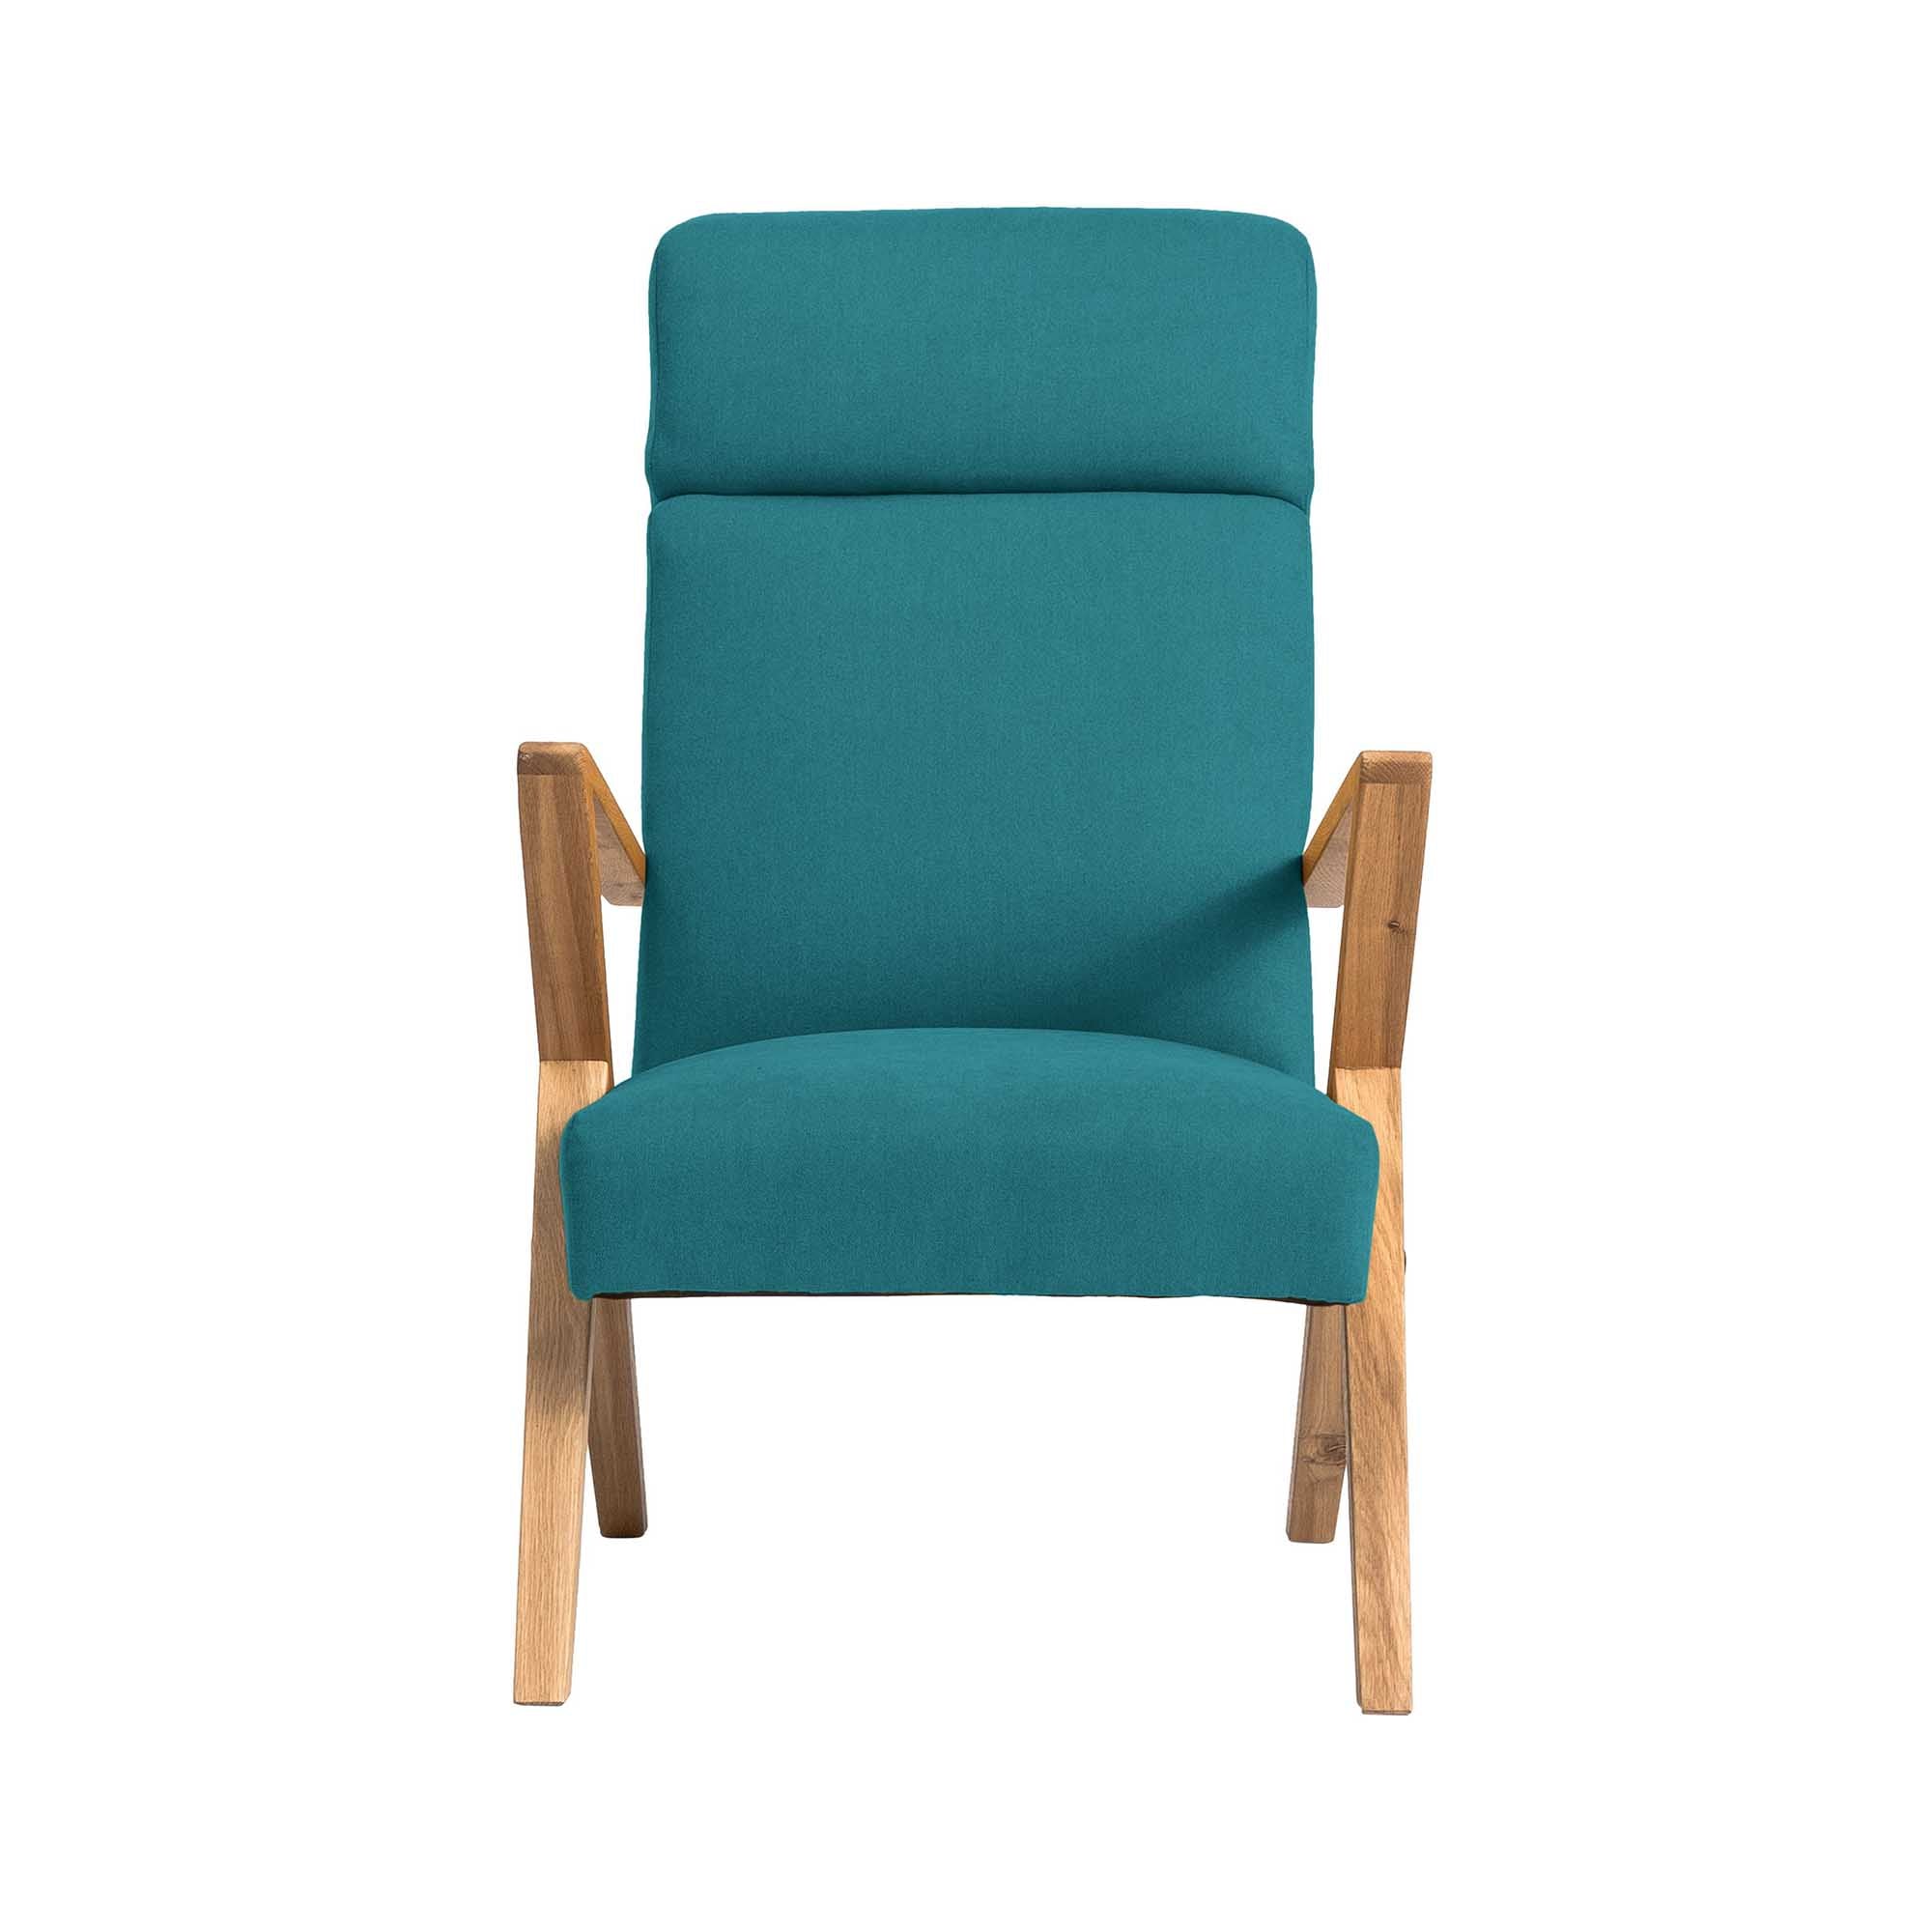 Lounge Chair, Oak Wood Frame, Natural Colour blue fabric, front view